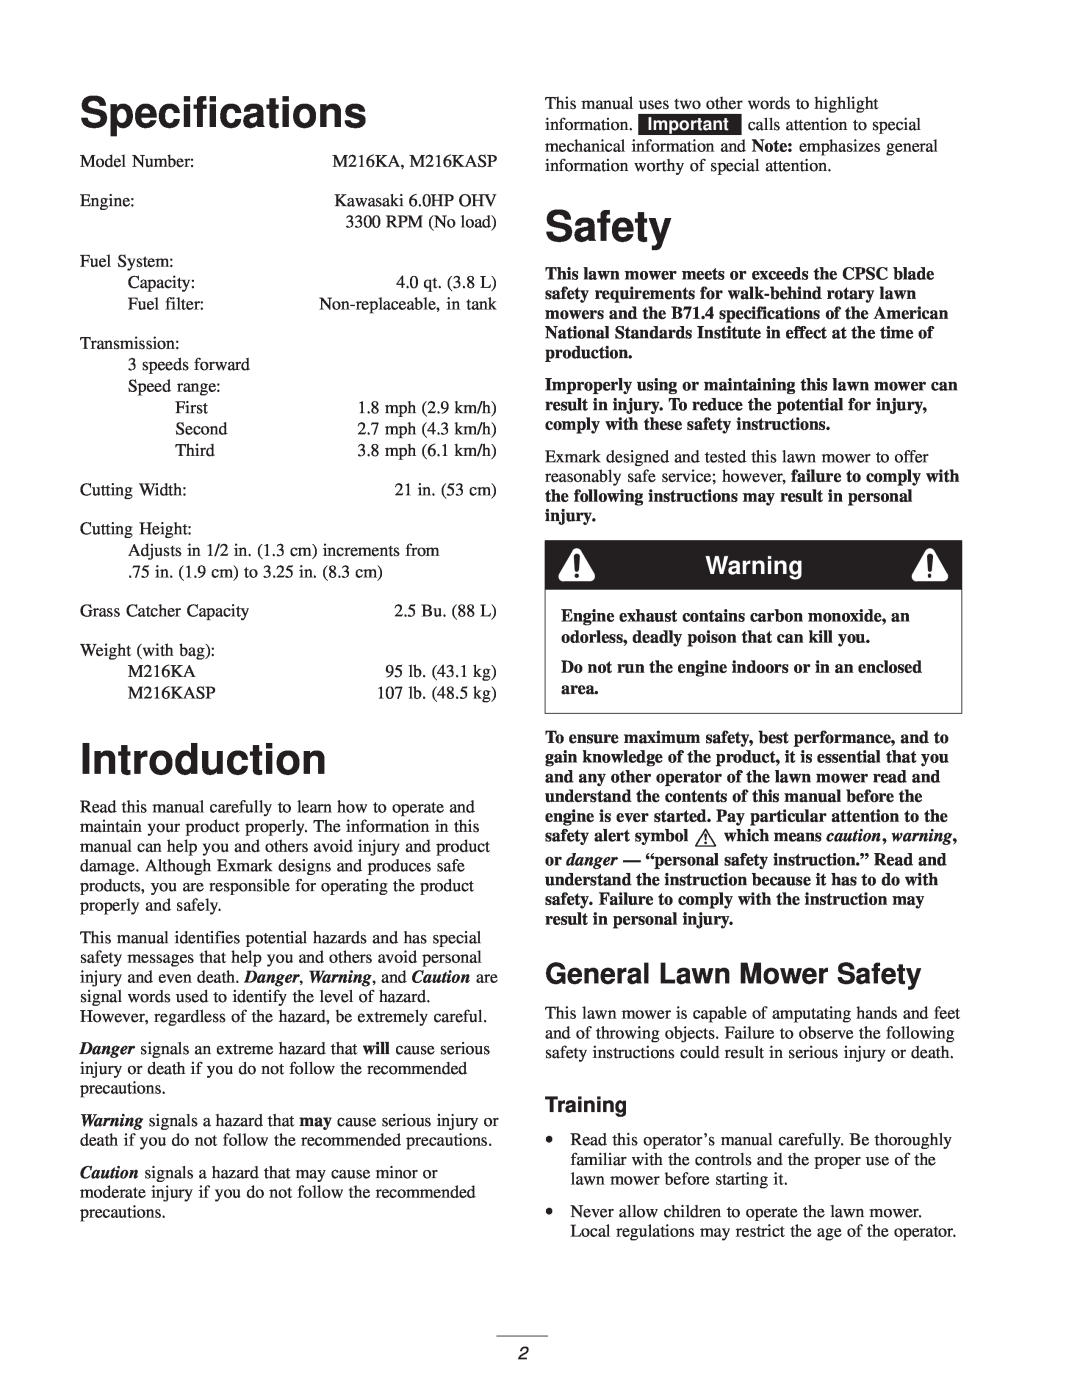 Exmark M216KA, M216KASP manual Specifications, Introduction, General Lawn Mower Safety, Training 